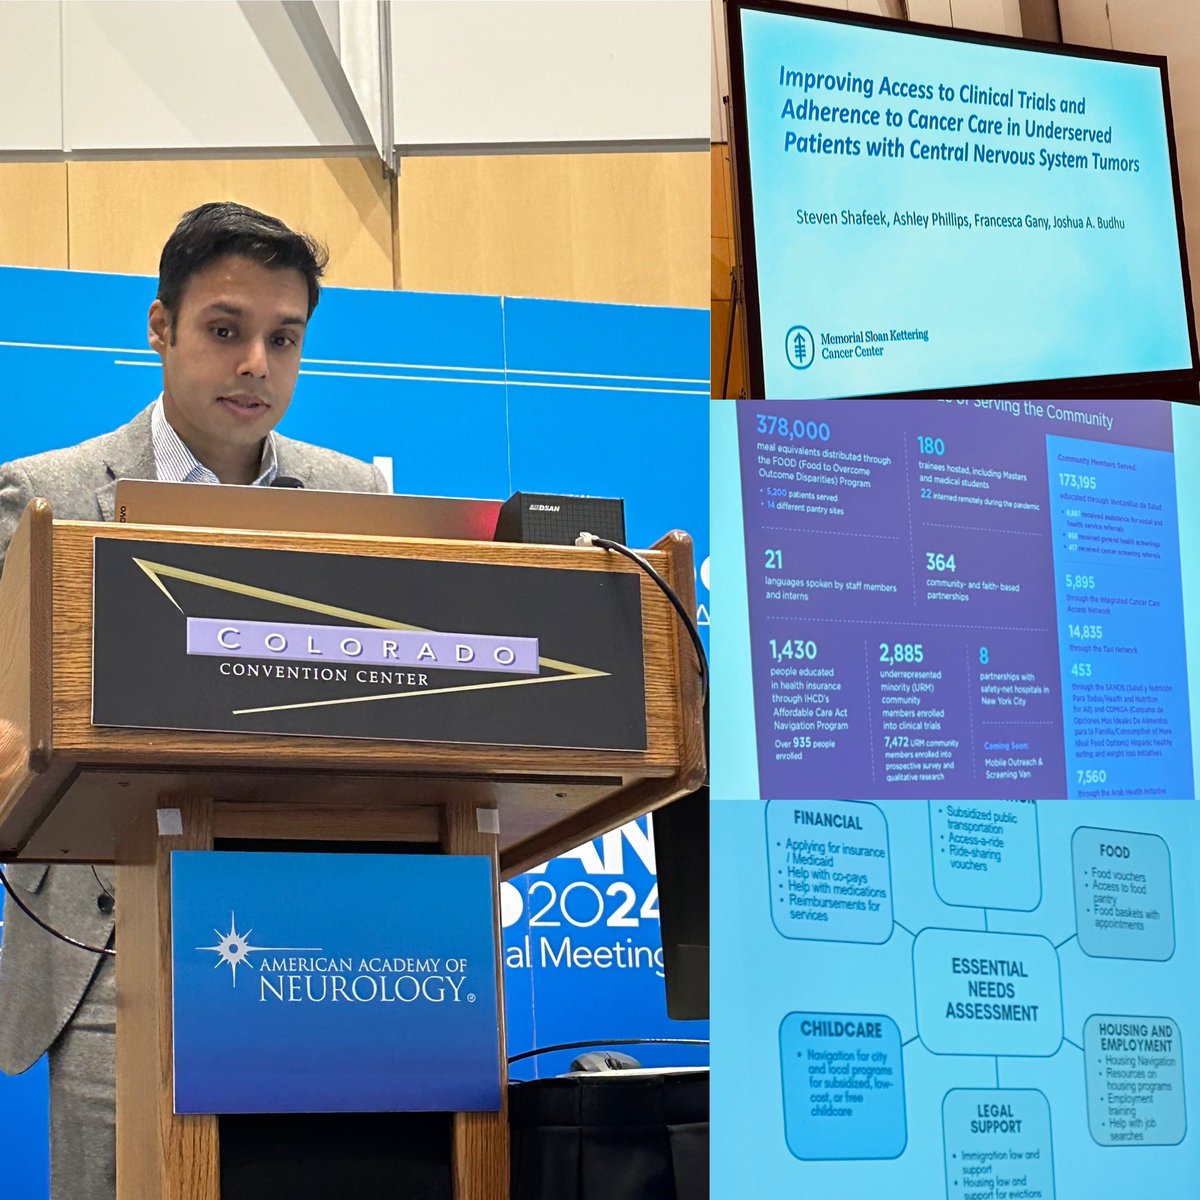 Great work by @JoshuaBudhu @MSKCancerCenter @mskihcd: practical tools to provide equitable cancer care to underserved patients. Patient navigators are key to ensuring pts can access resources & clin trials during rx for cancer #HealthEquity @WCMCNeurology